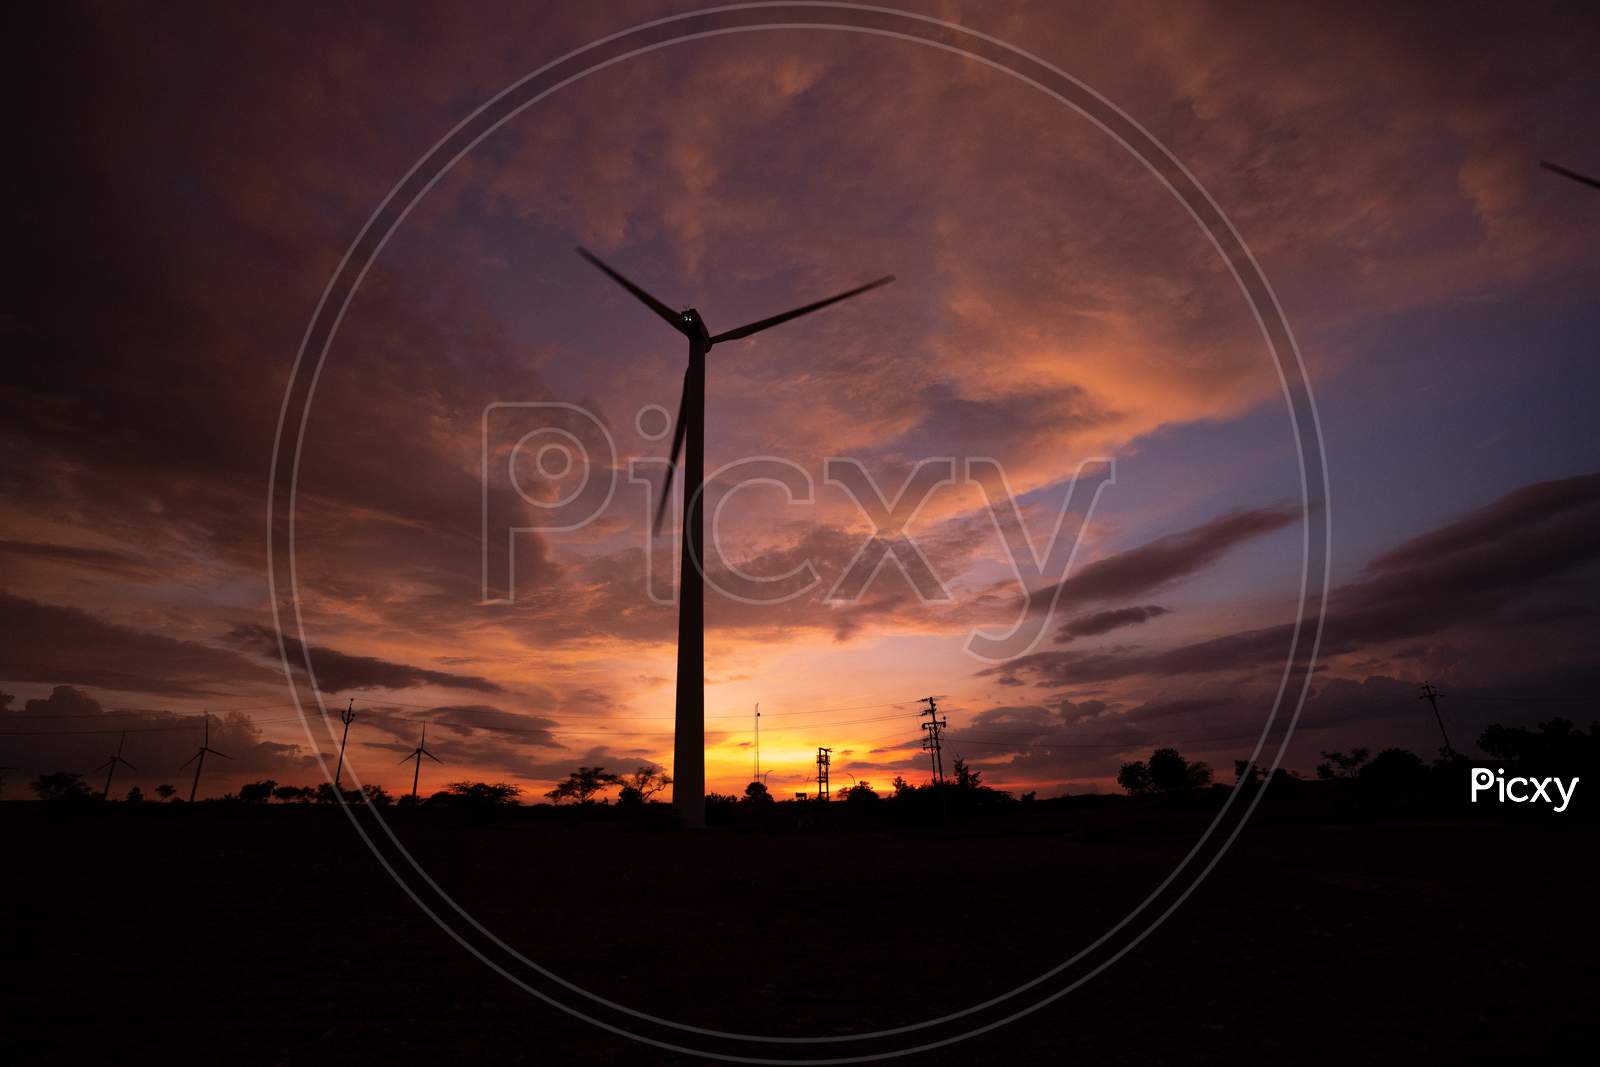 Silhouette Of A Windmill During Sunset